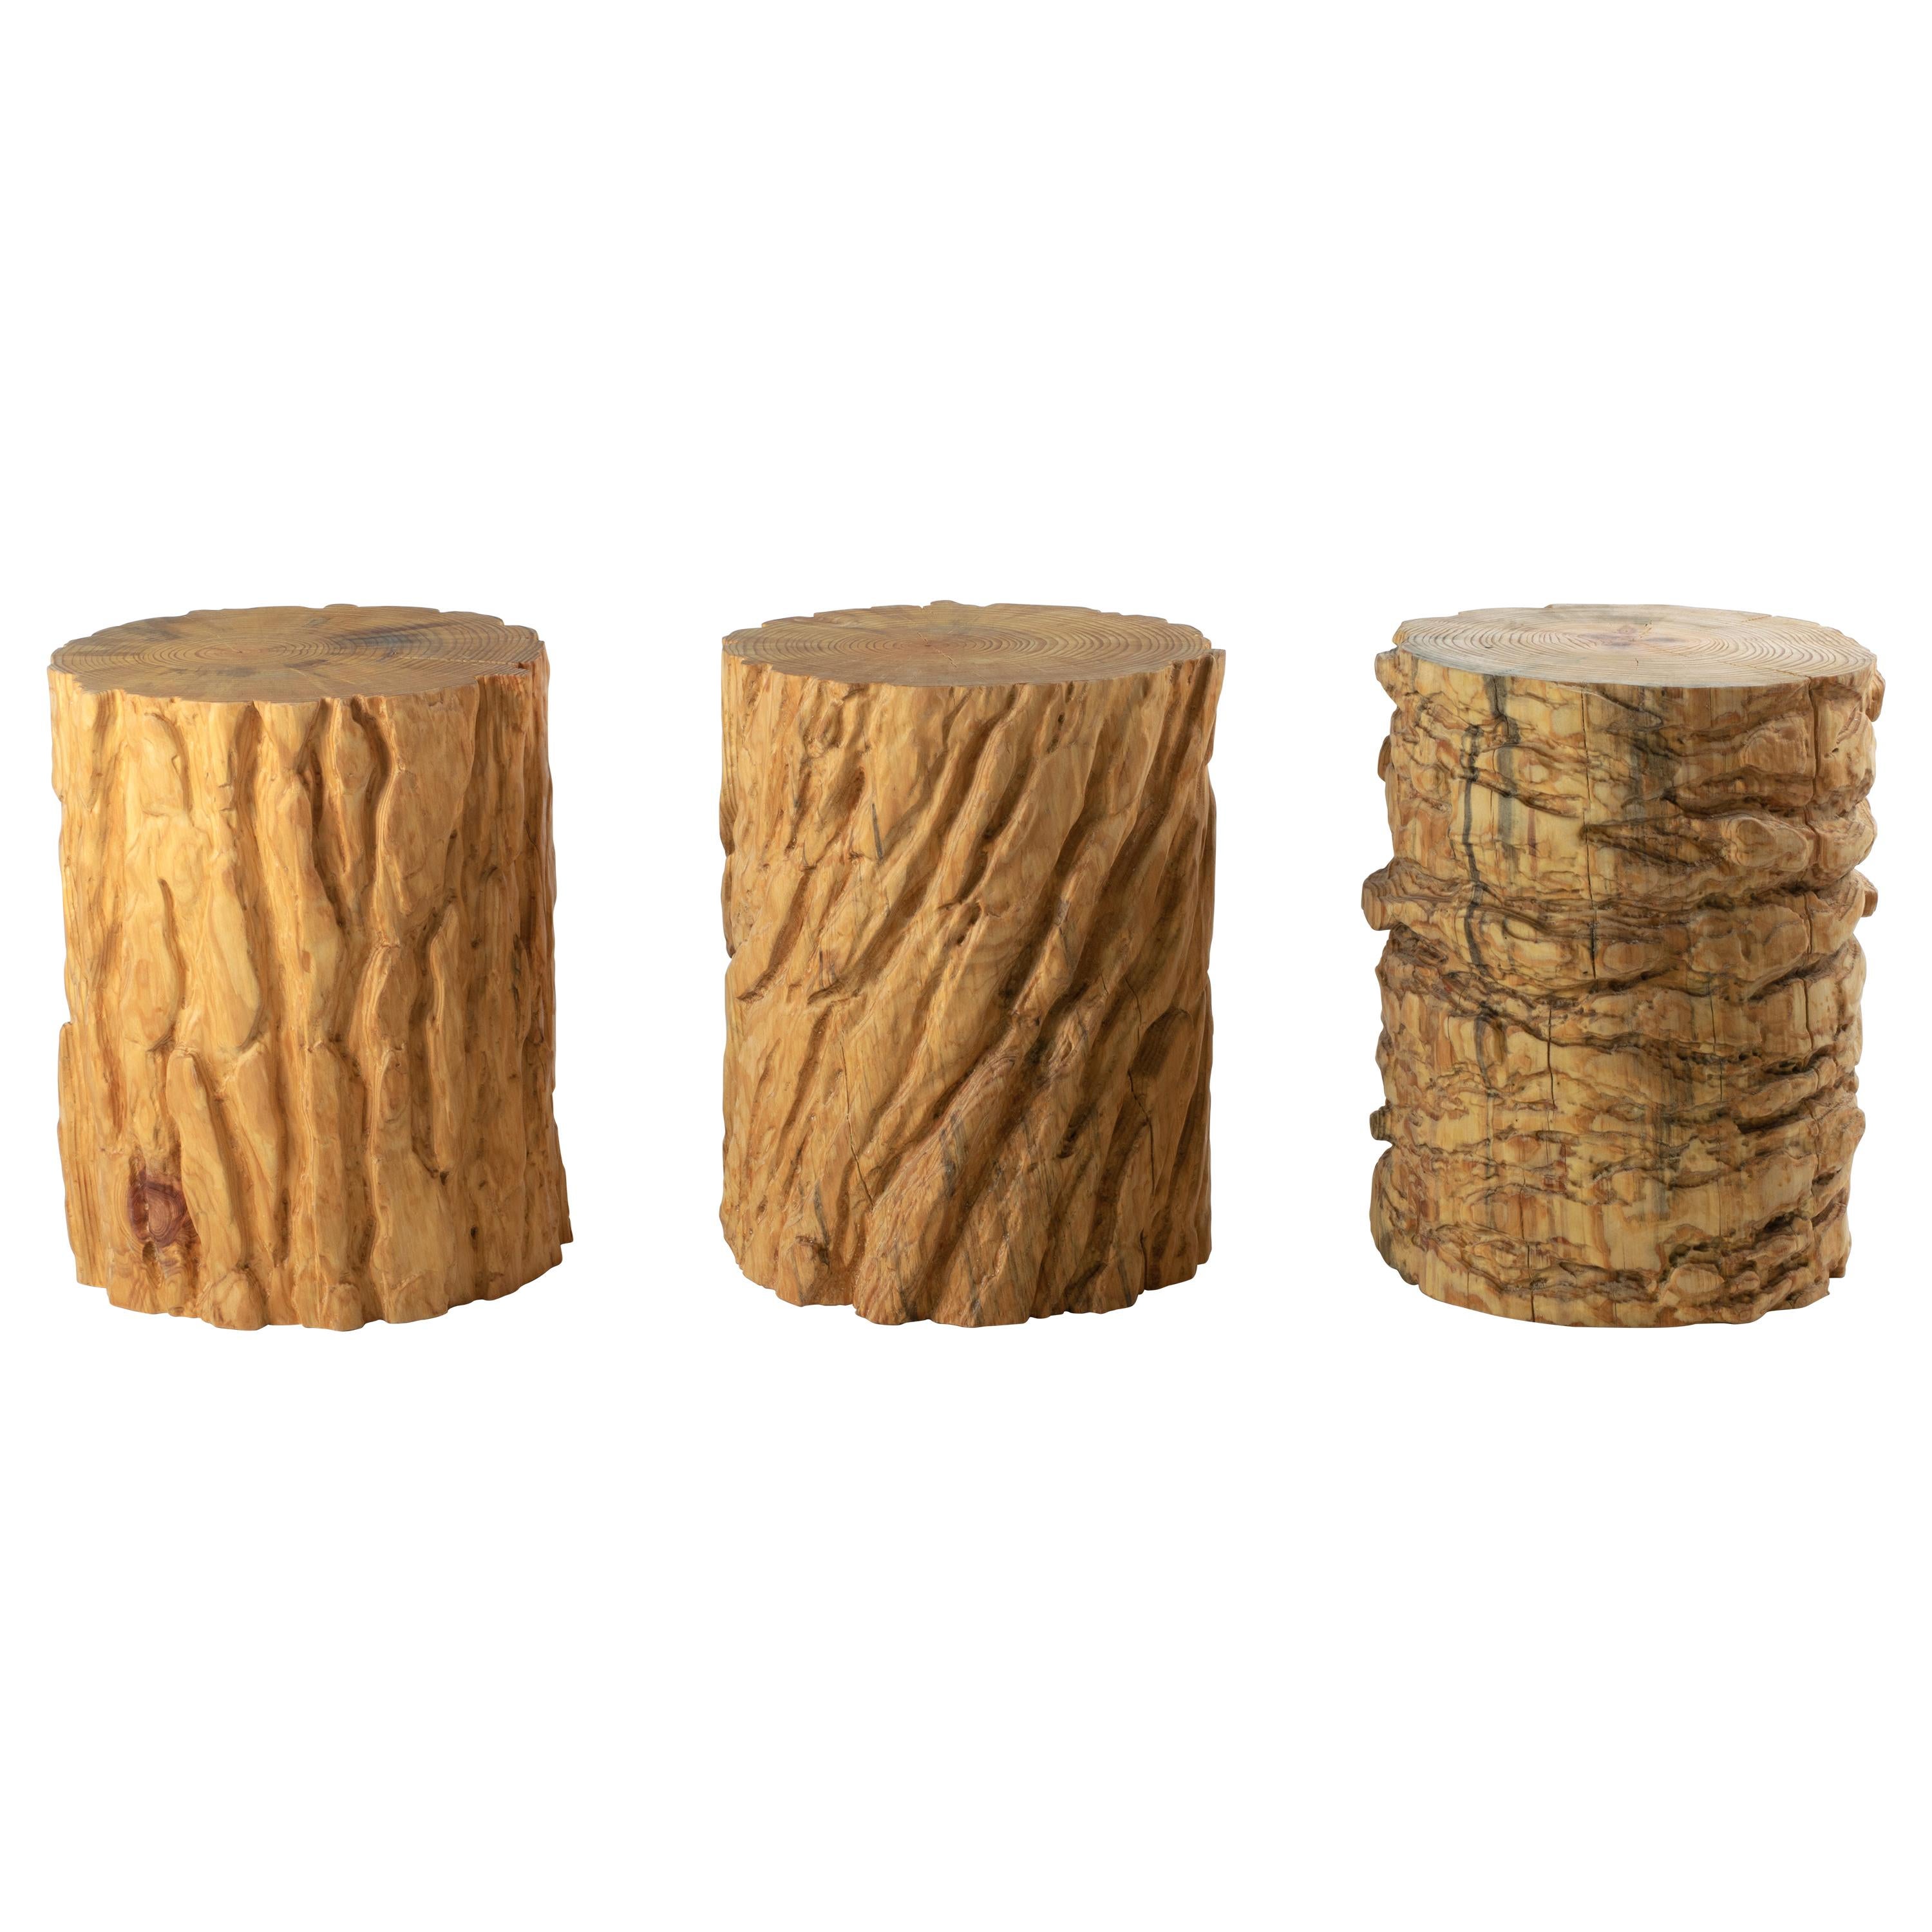 Bark Map Stool, Set of 3 by Timbur, Represented by Tuleste Factory